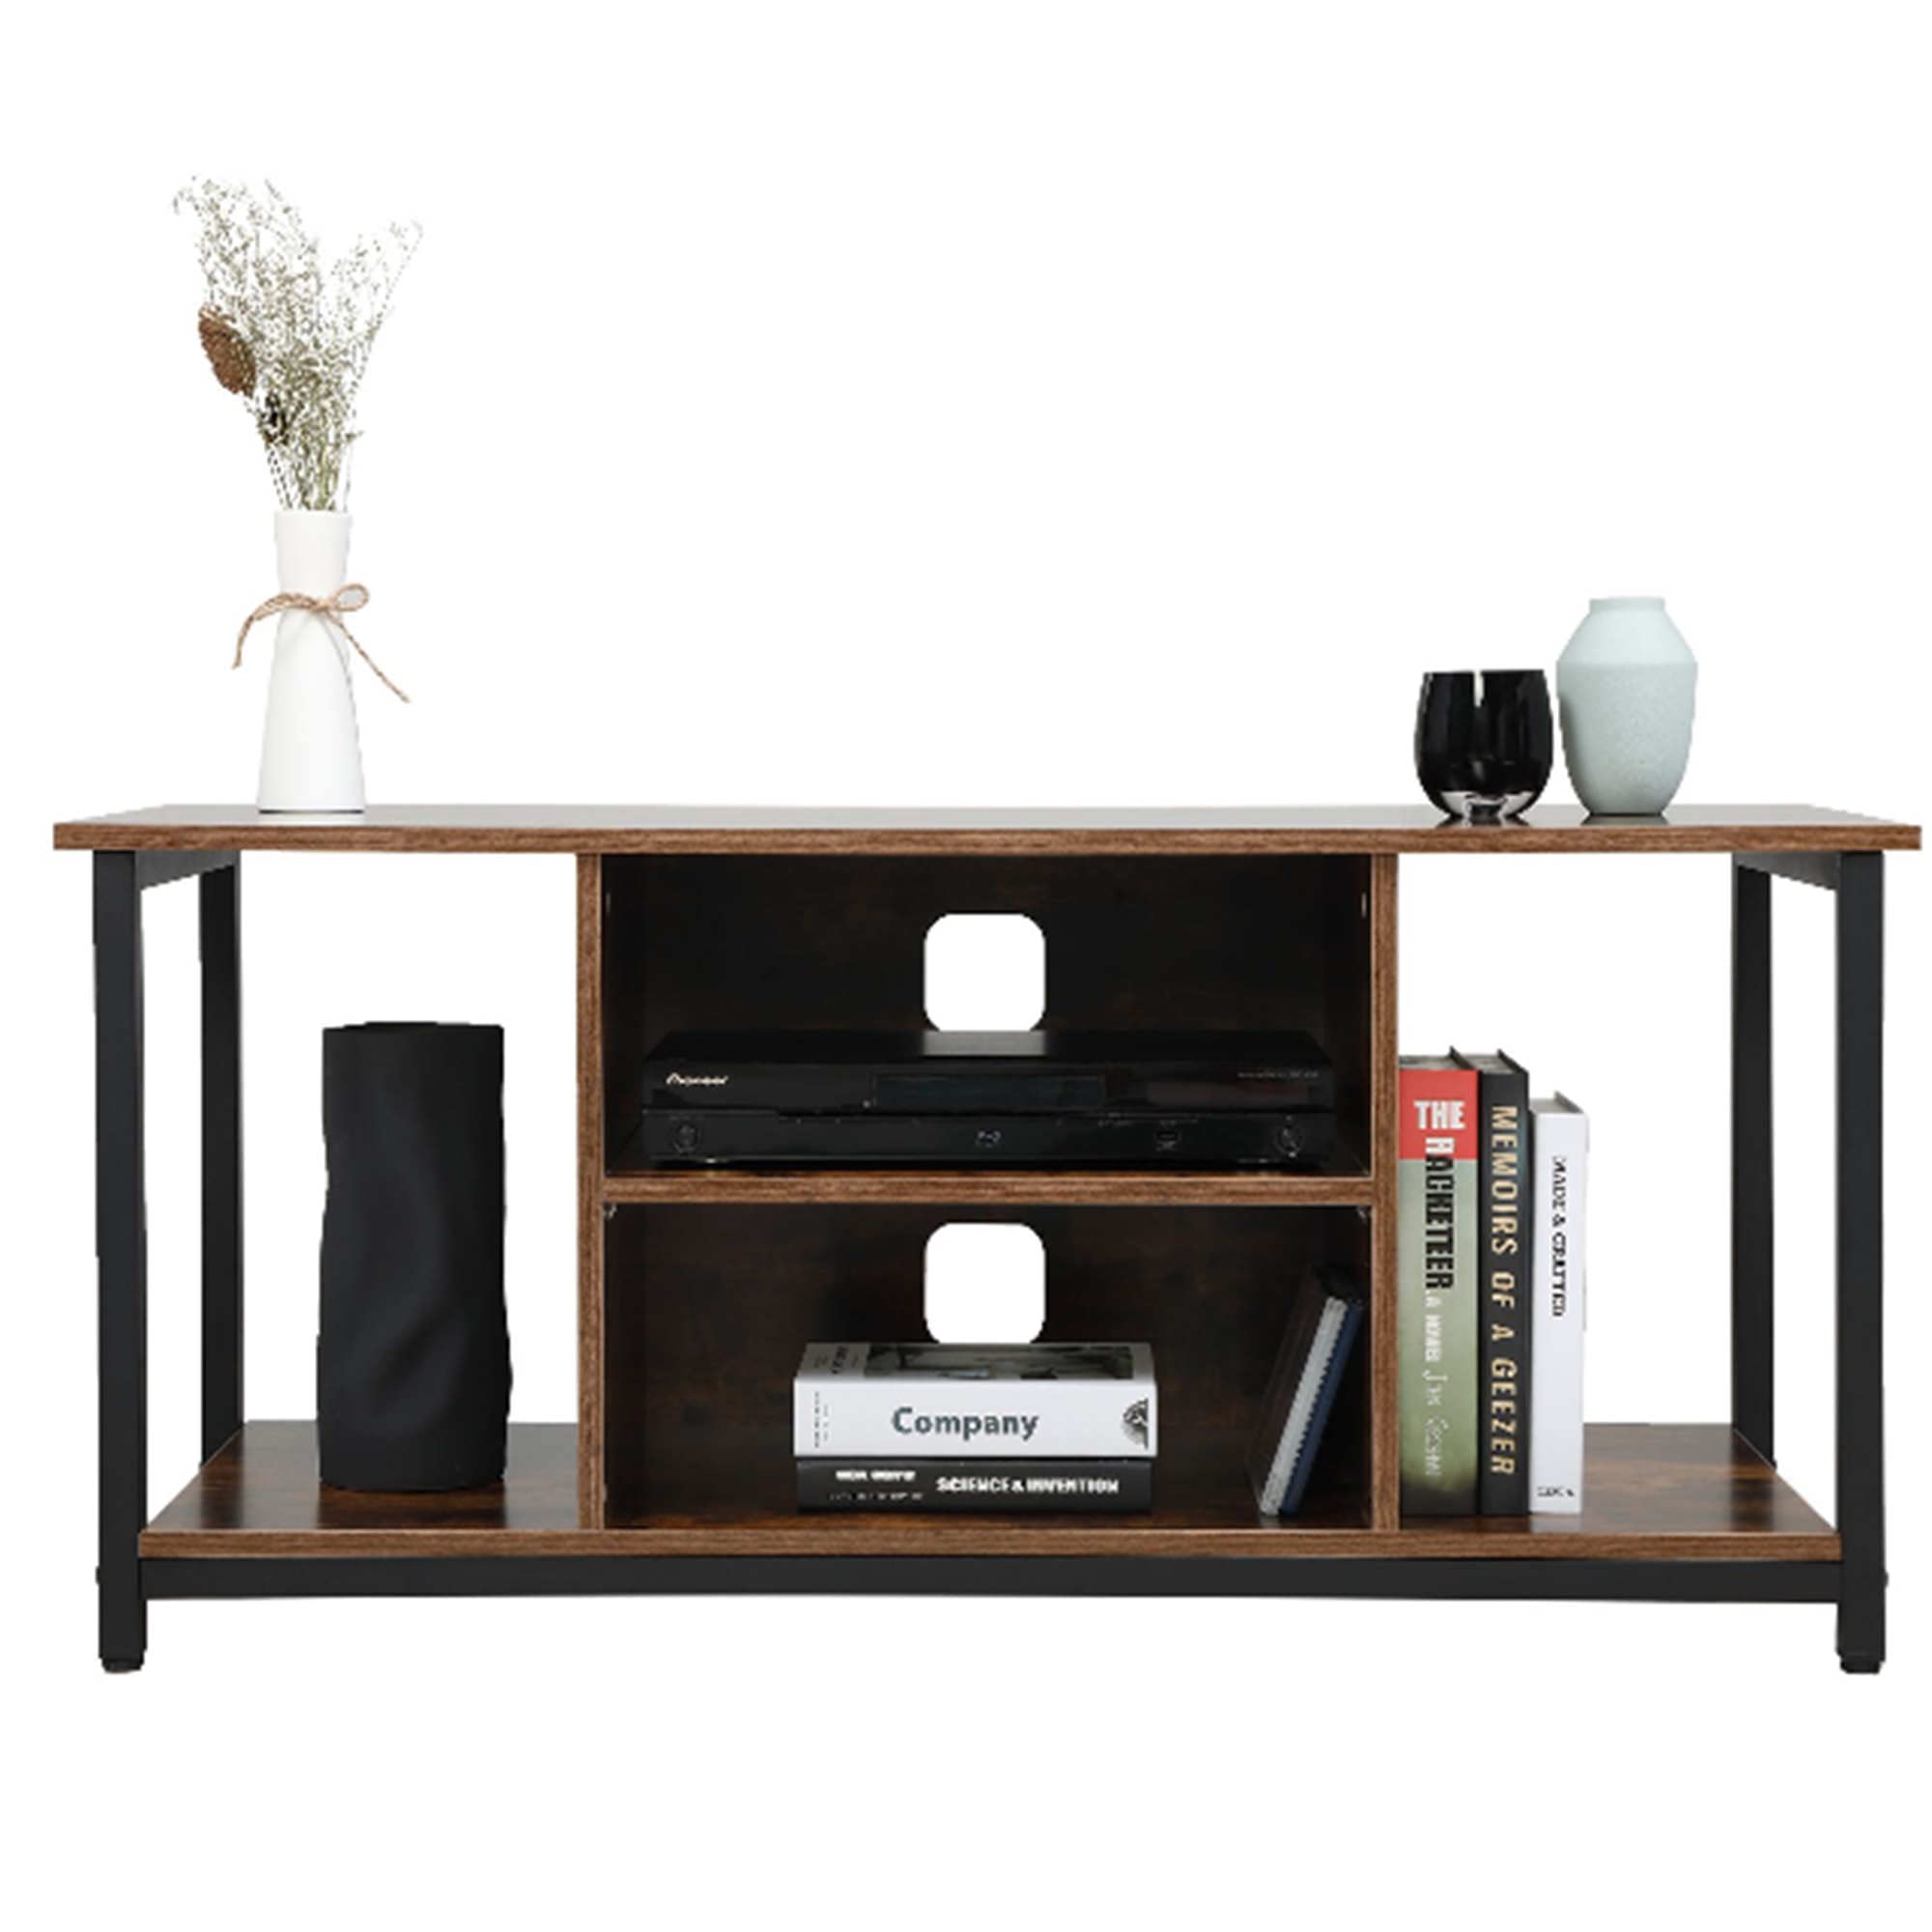 Malibu Bum Tv Stand For Tv Up To 50 Inch 3 Tier Entertainment Center Modern Tv Stand Media Console Table With Open Shelving Stor